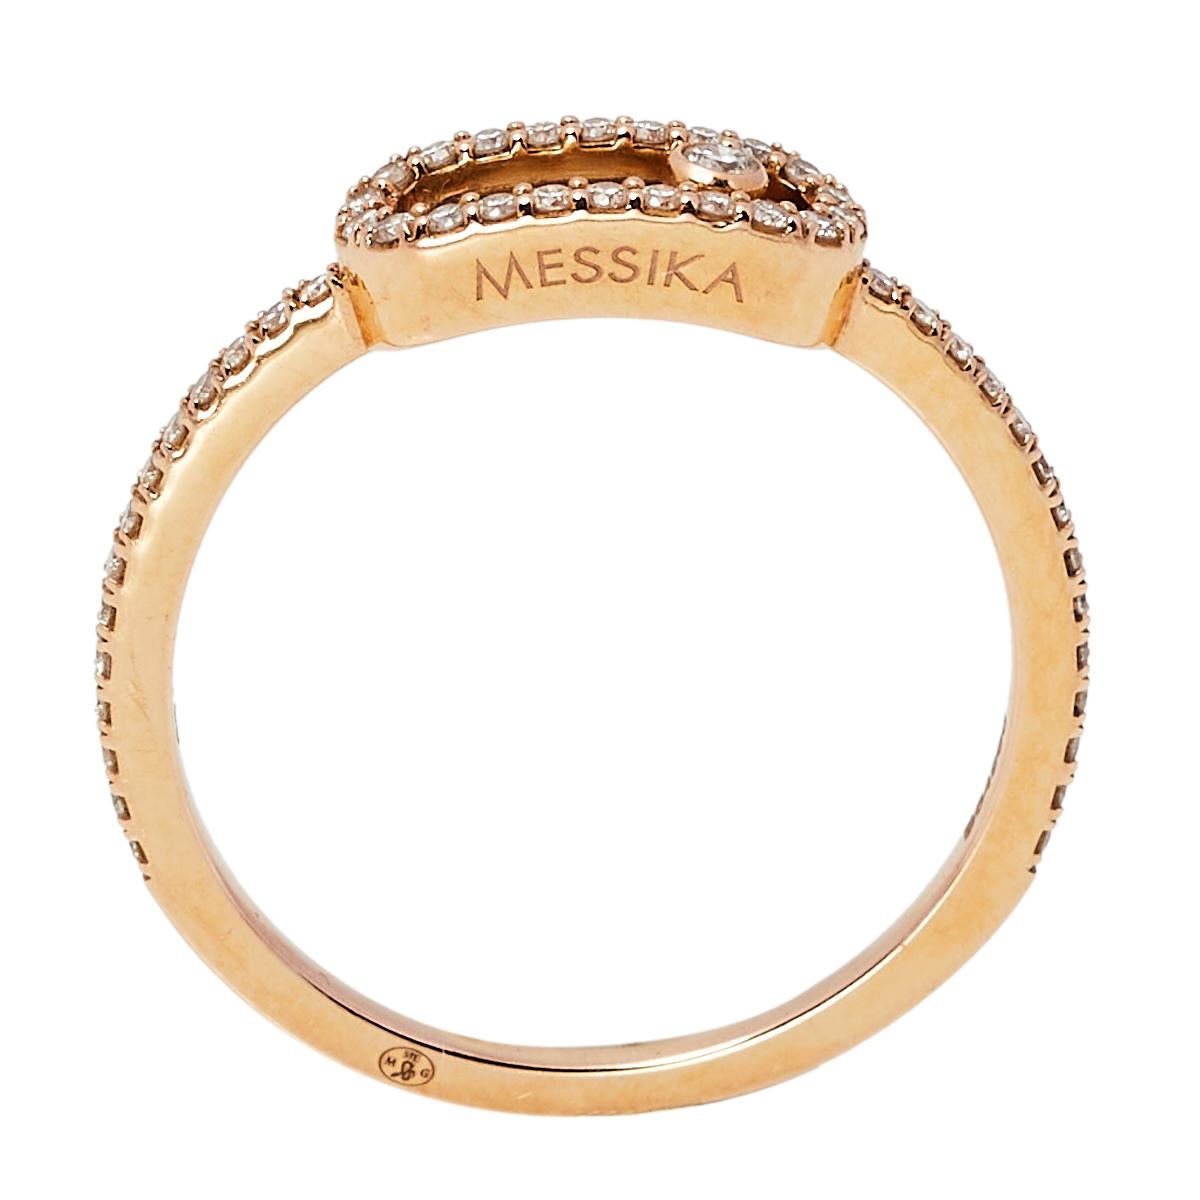 Bringing the precision of graphic designs into fine jewelry, the Move Uno collection of Messika is a subtle combination of style and elegance. This ring is designed from 18k rose gold featuring a smooth band and a diamond-outlined center cutout. As